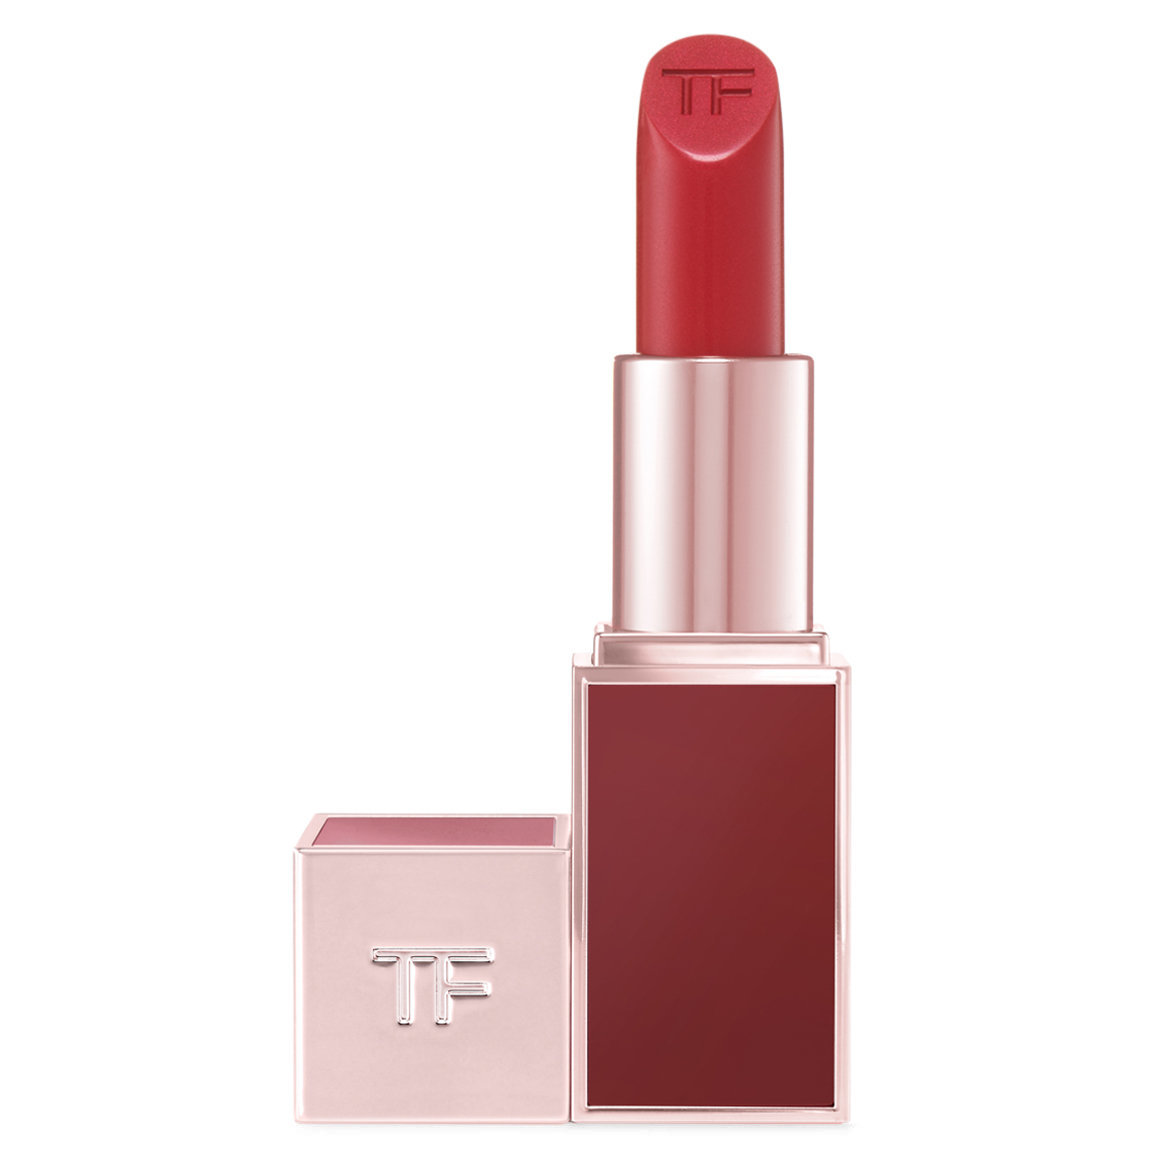 TOM FORD Lost Cherry Lip Color Beautylish